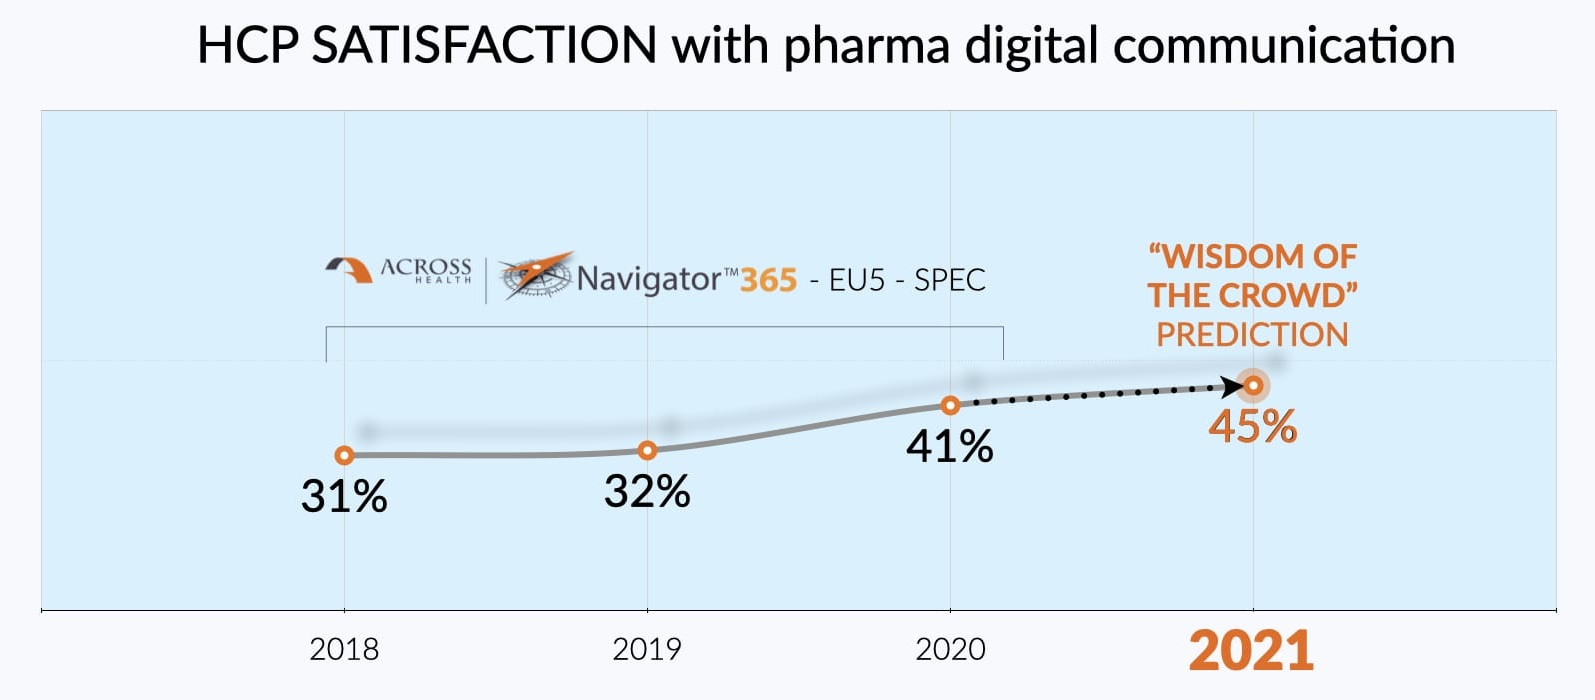 HCP satisfaction with pharma digital communications in 2021